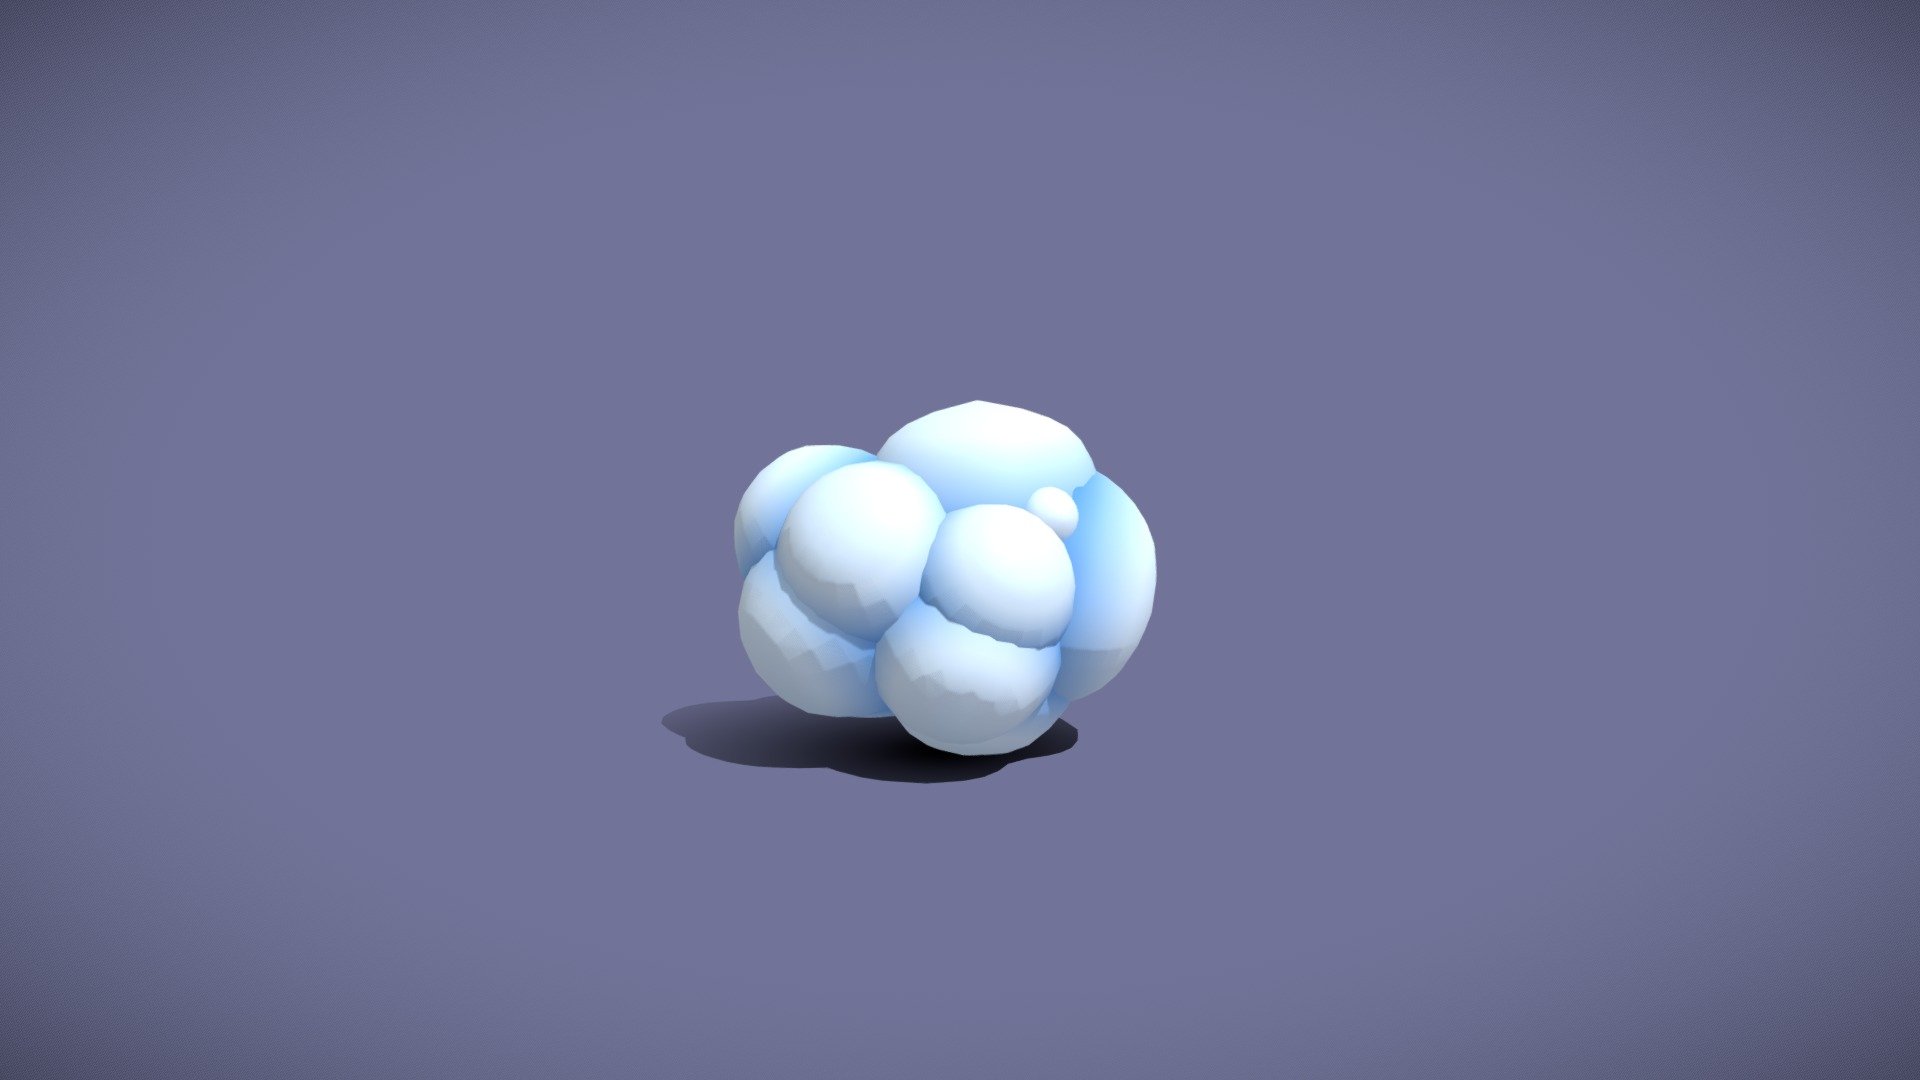 lowpoly cloud model made for a boardgame pin at a college project - Cartoon Cloud - Buy Royalty Free 3D model by Sofia Campoy (@SofiaCampoy) 3d model